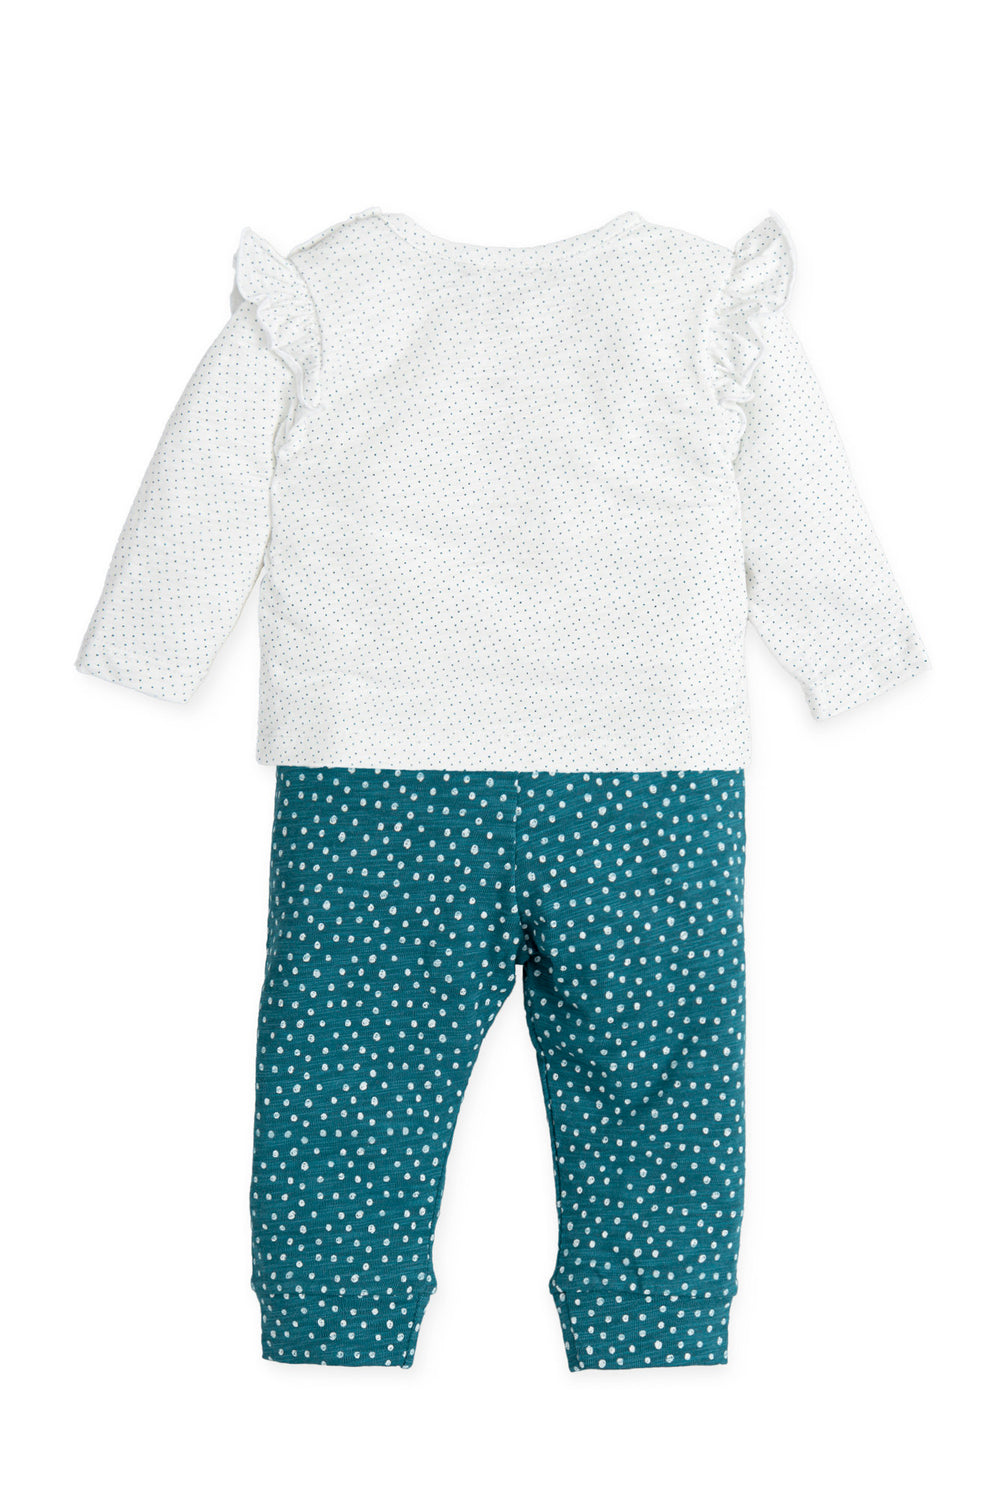 Tutto Piccolo "Calista" Teal Galaxy Print Top & Leggings | Millie and John